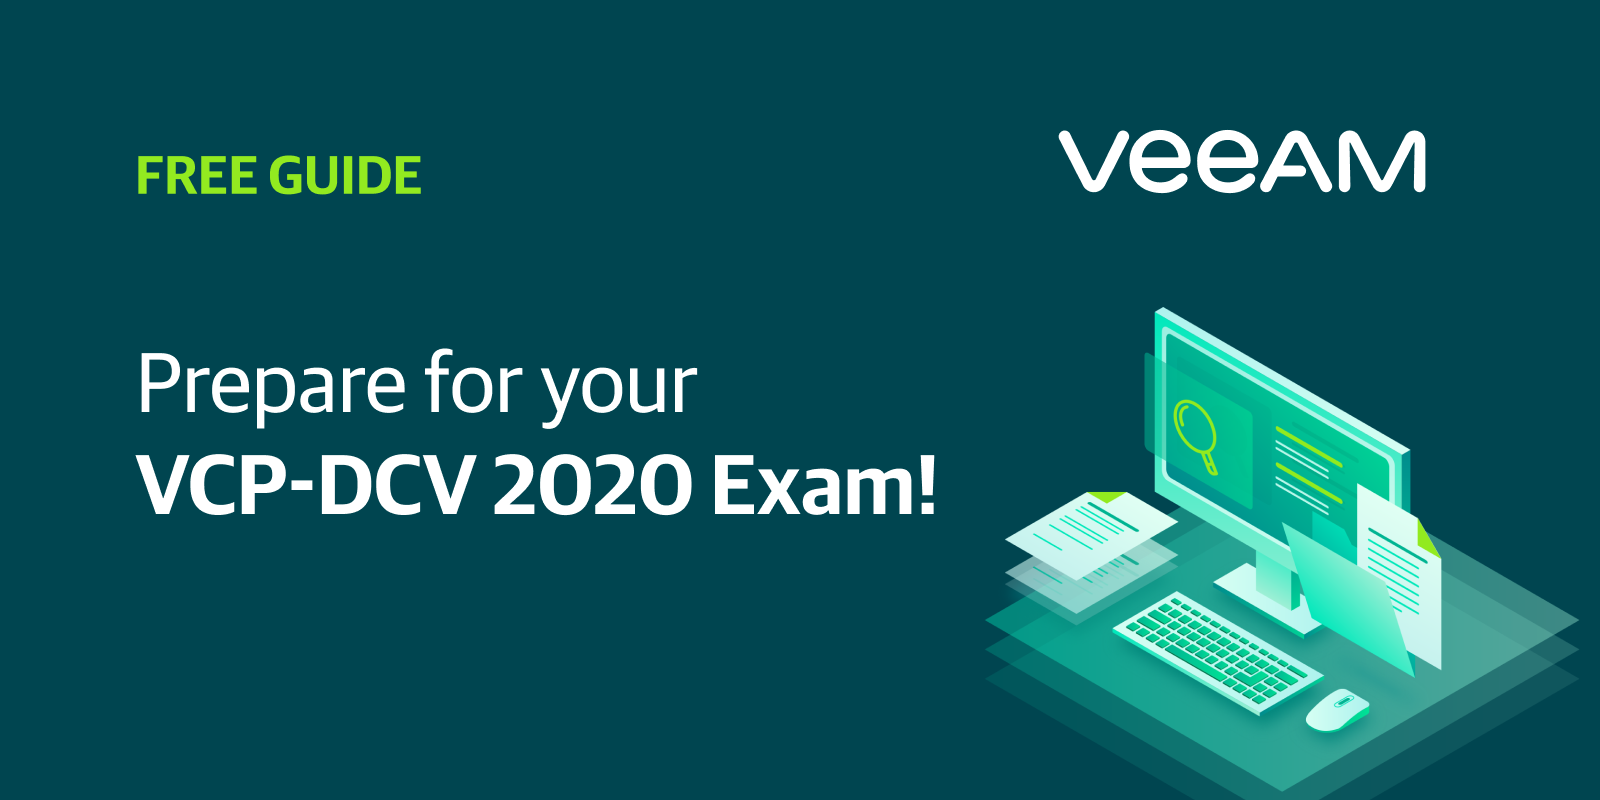 Prepare for your VMware Certified VCPDCV 2020 Exam